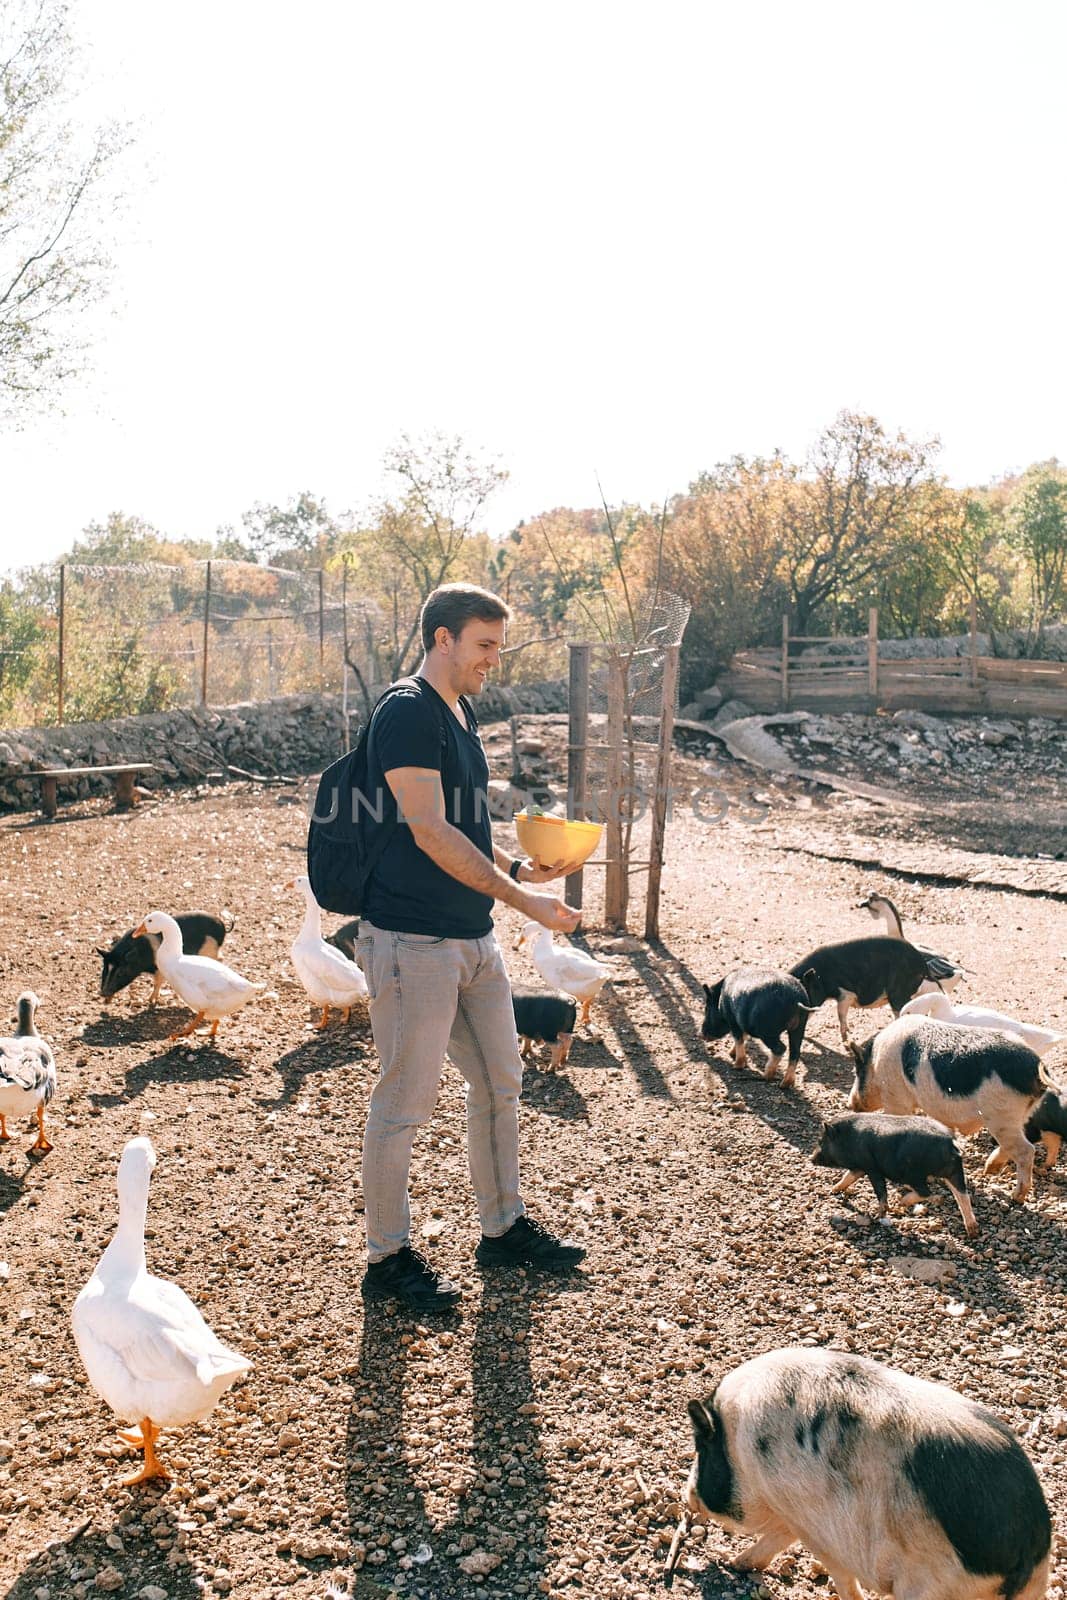 Young smiling guy with a bowl in his hands feeds fluffy piglets and white geese. High quality photo